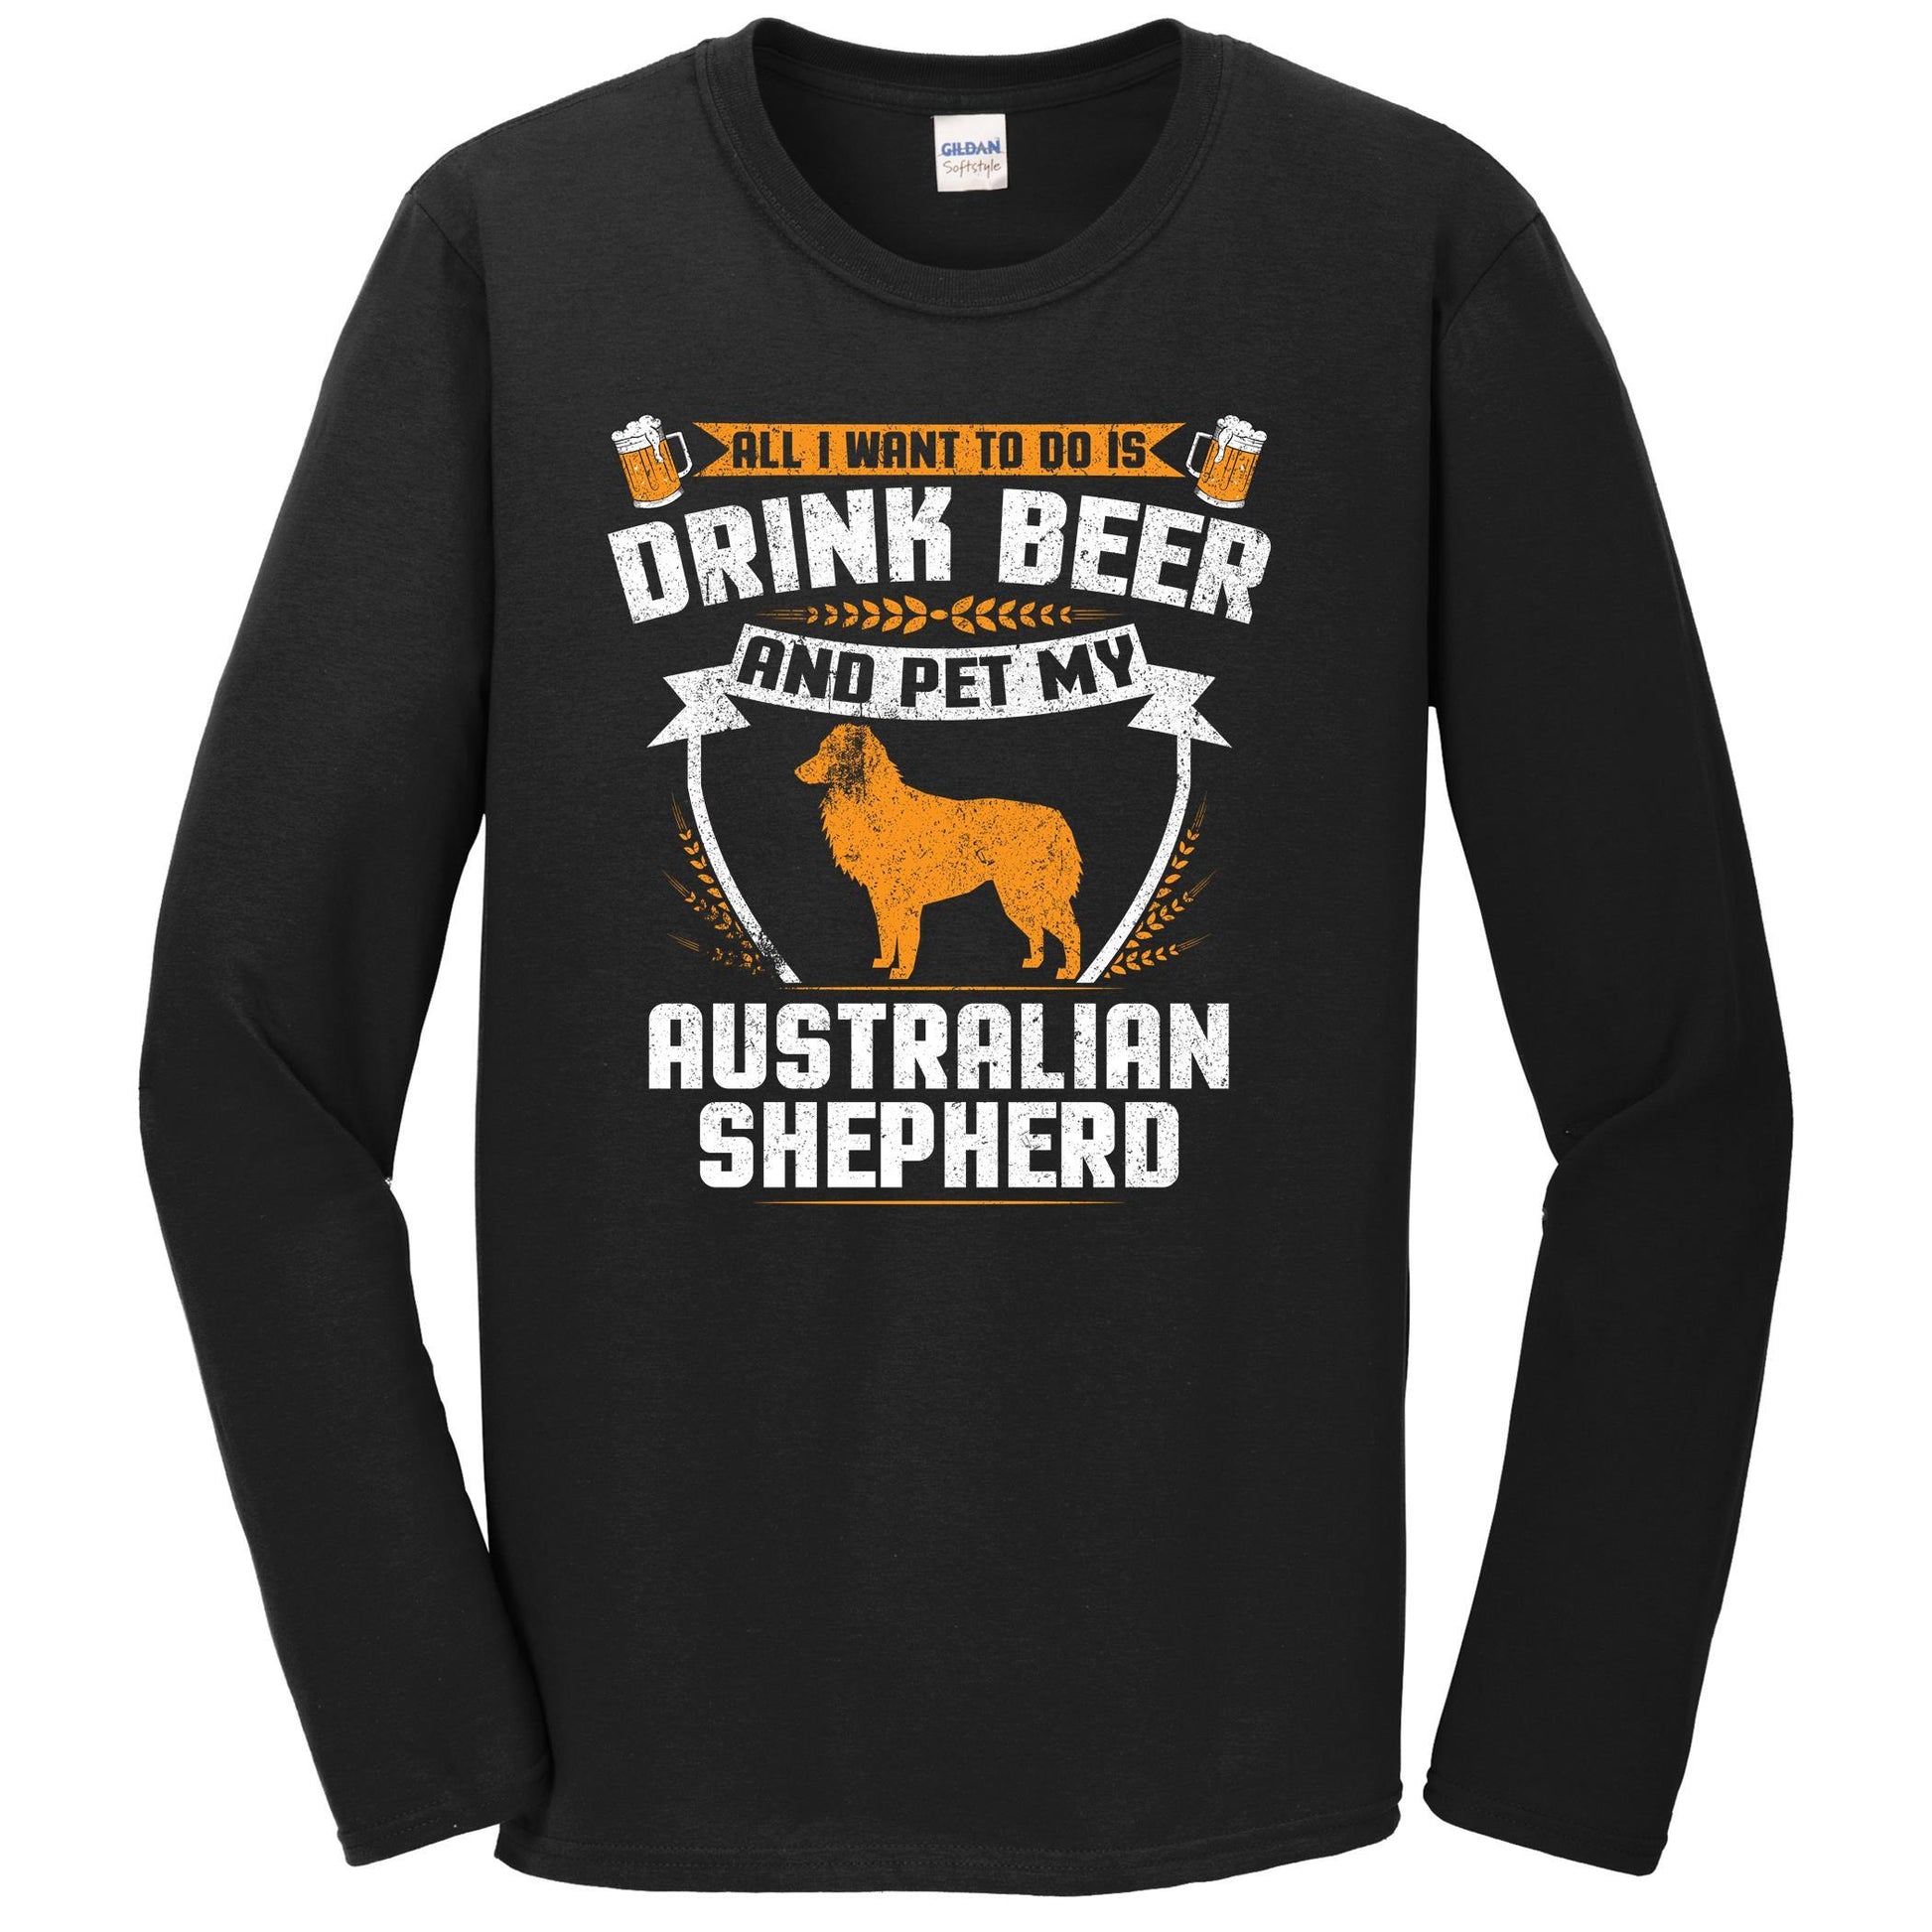 All I Want To Do Is Drink Beer And Pet My Australian Shepherd Funny Dog Owner Long Sleeve Shirt